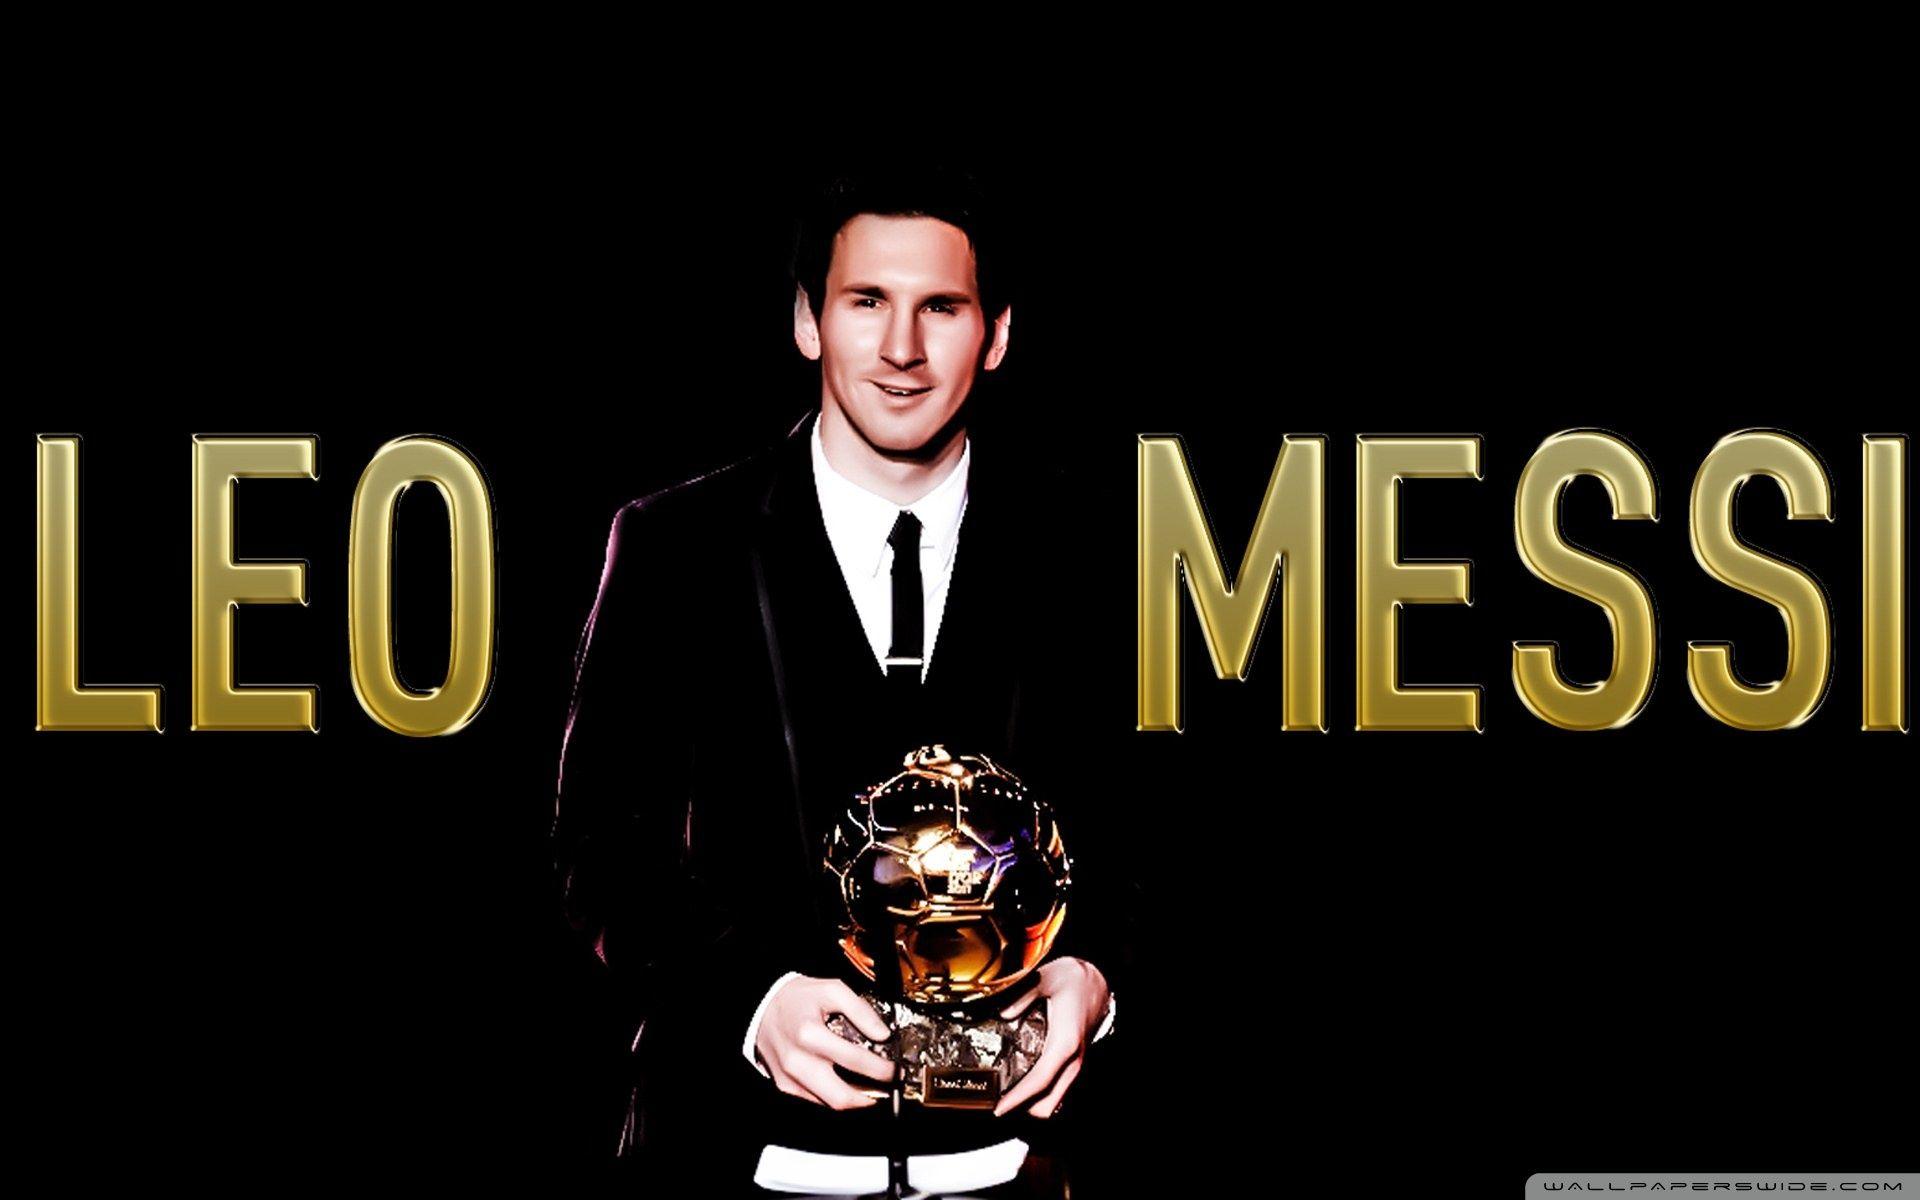 Messi with the Ballon d'or. ❤ 4K HD Desktop Wallpaper for 4K